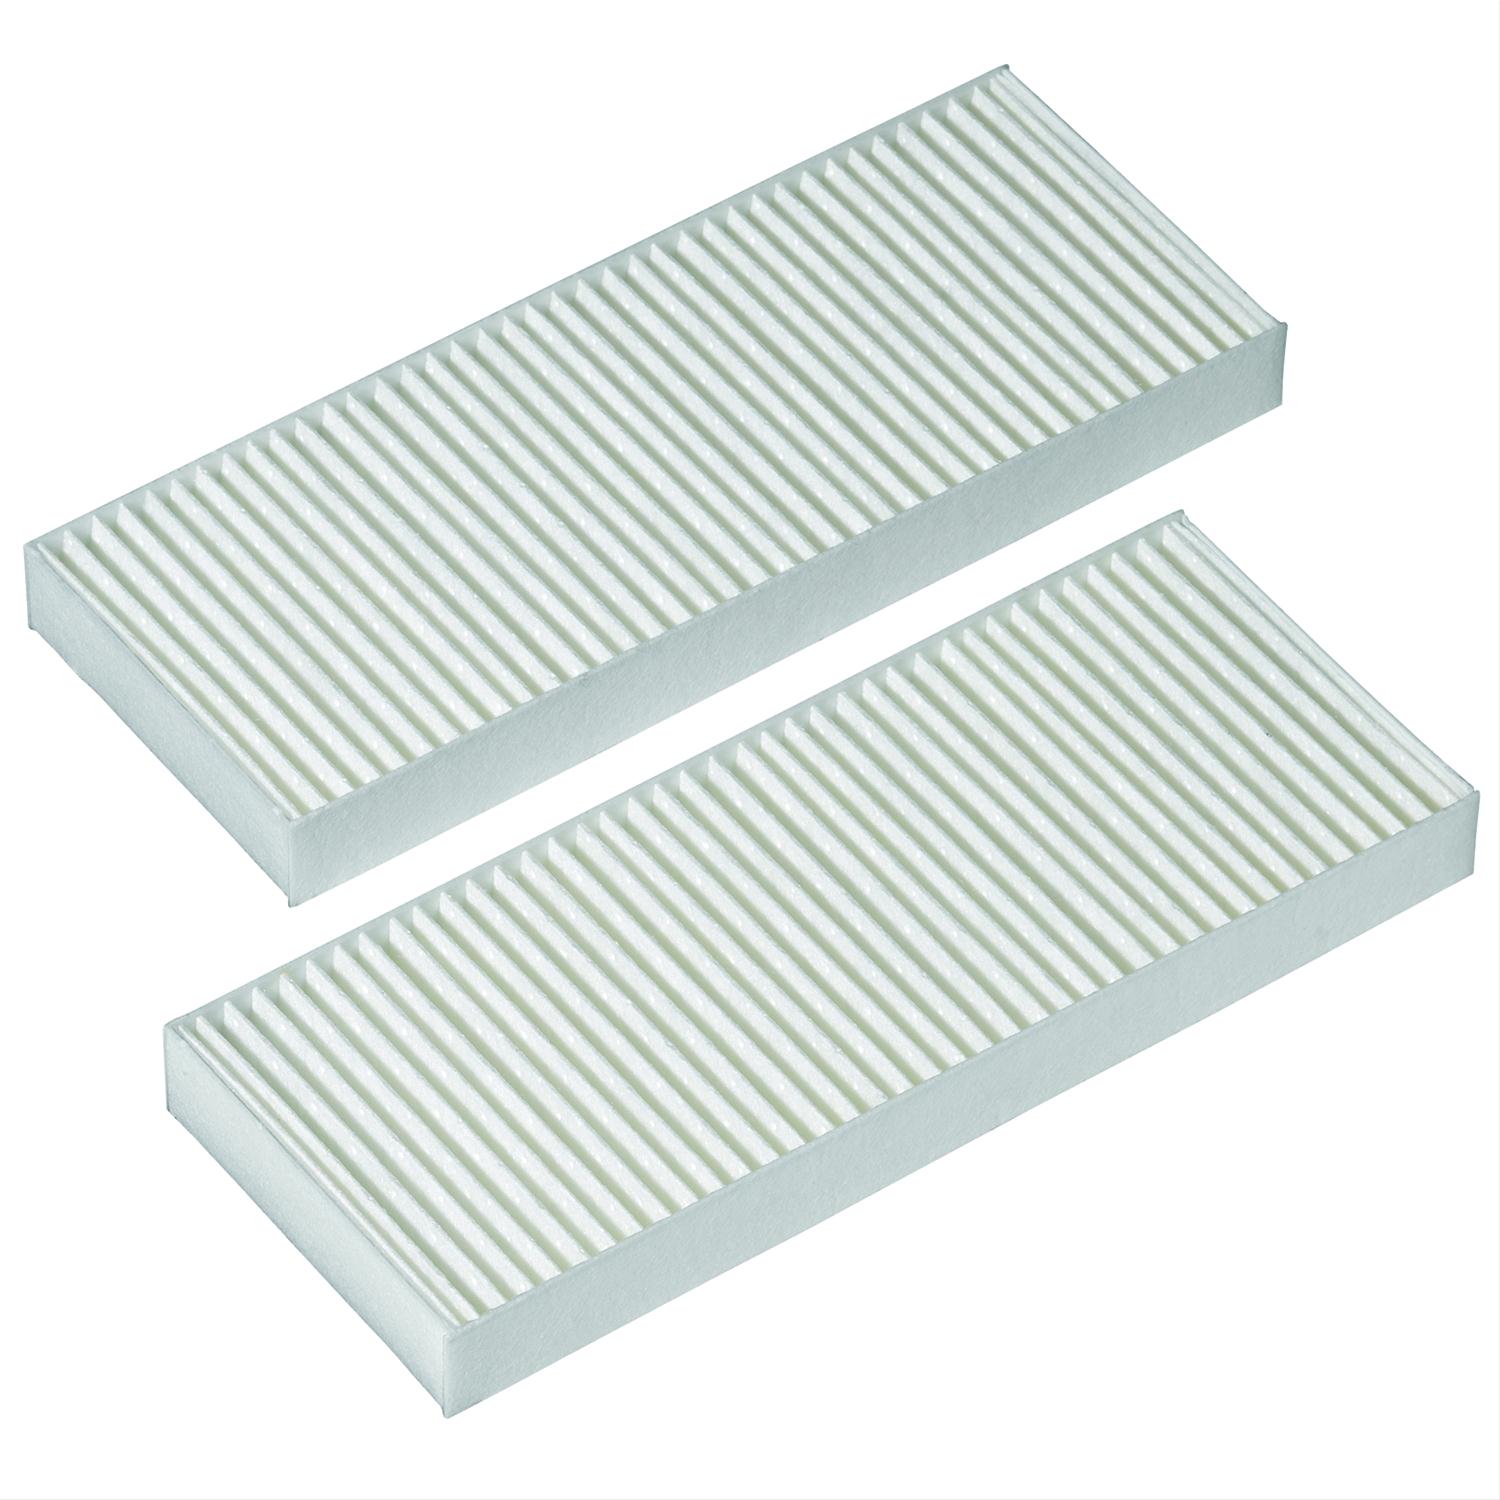 Find the best auto part for your vehicle: Shop for the perfect fitment ATP Professional autoparts cabin air filter for your vehicle with us at an affordable price.